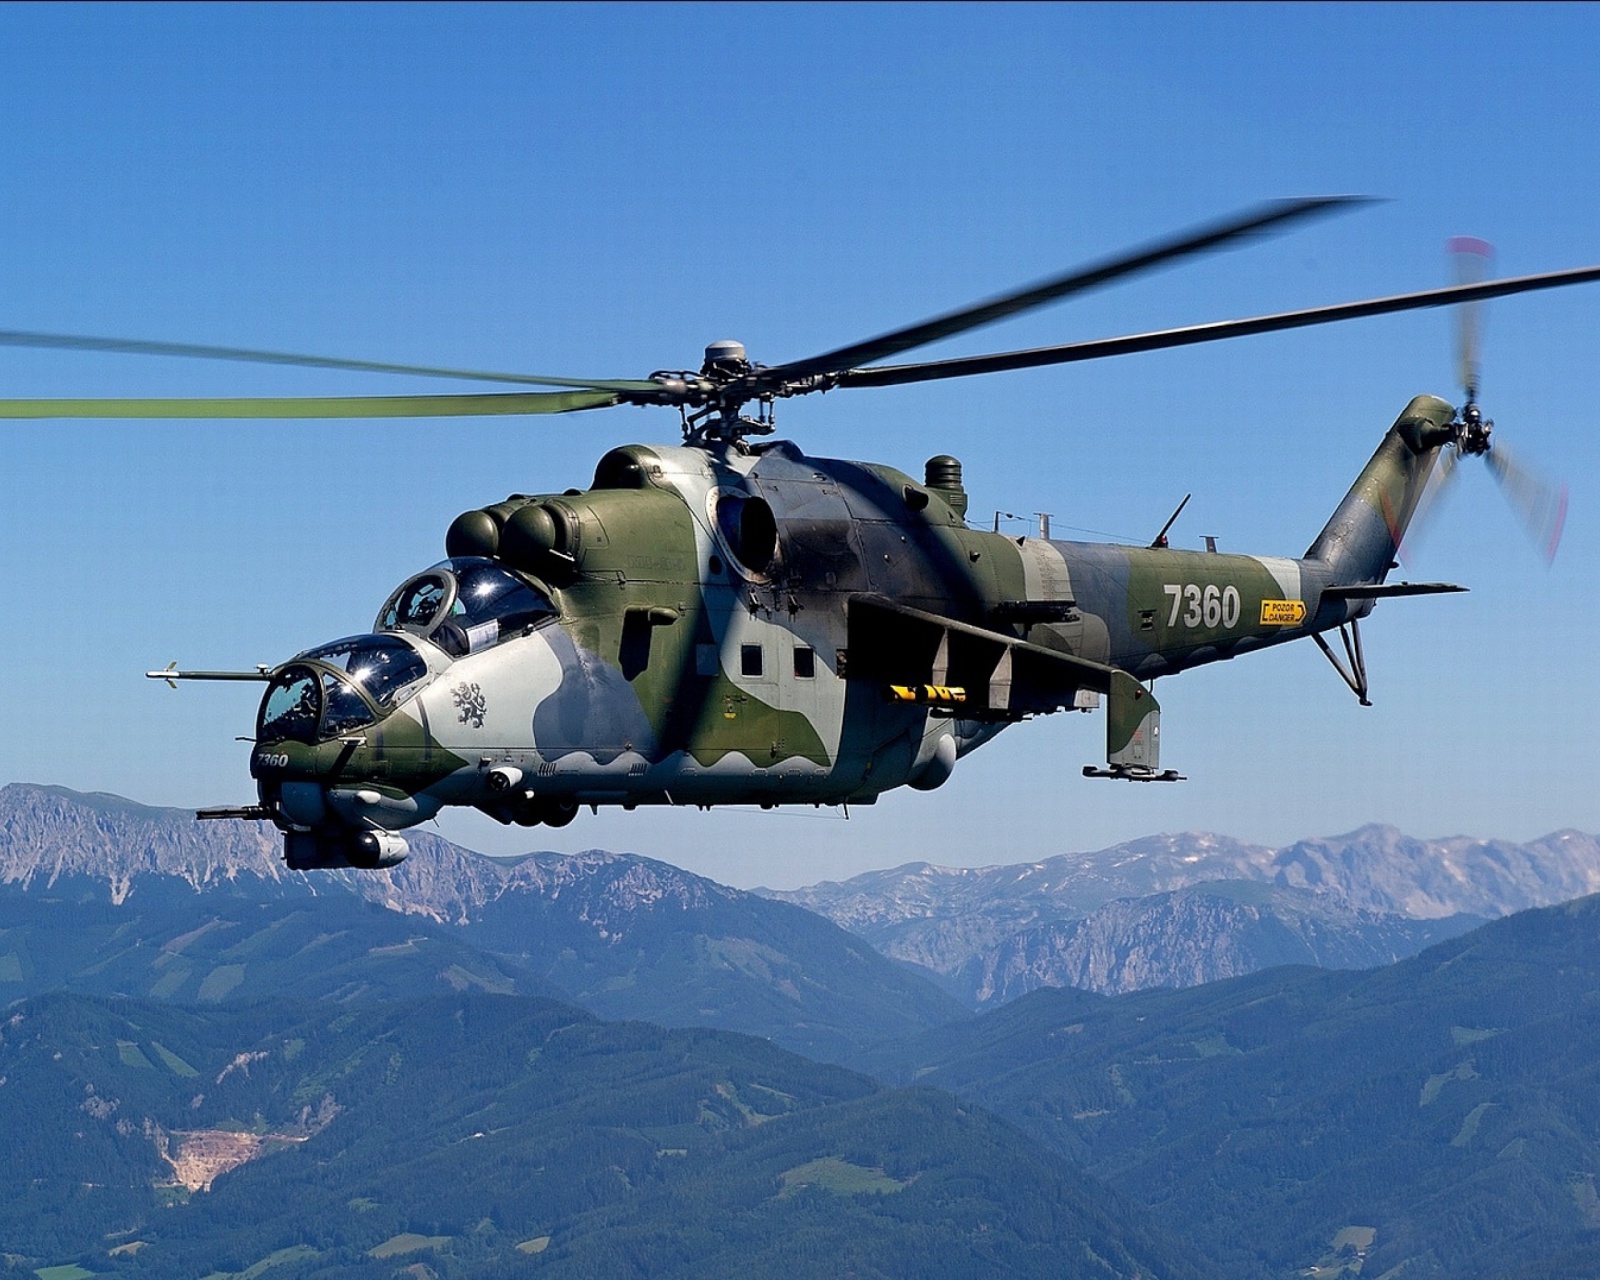 Mil Mi 24 Hind Attack Helicopter wallpaper 1600x1280